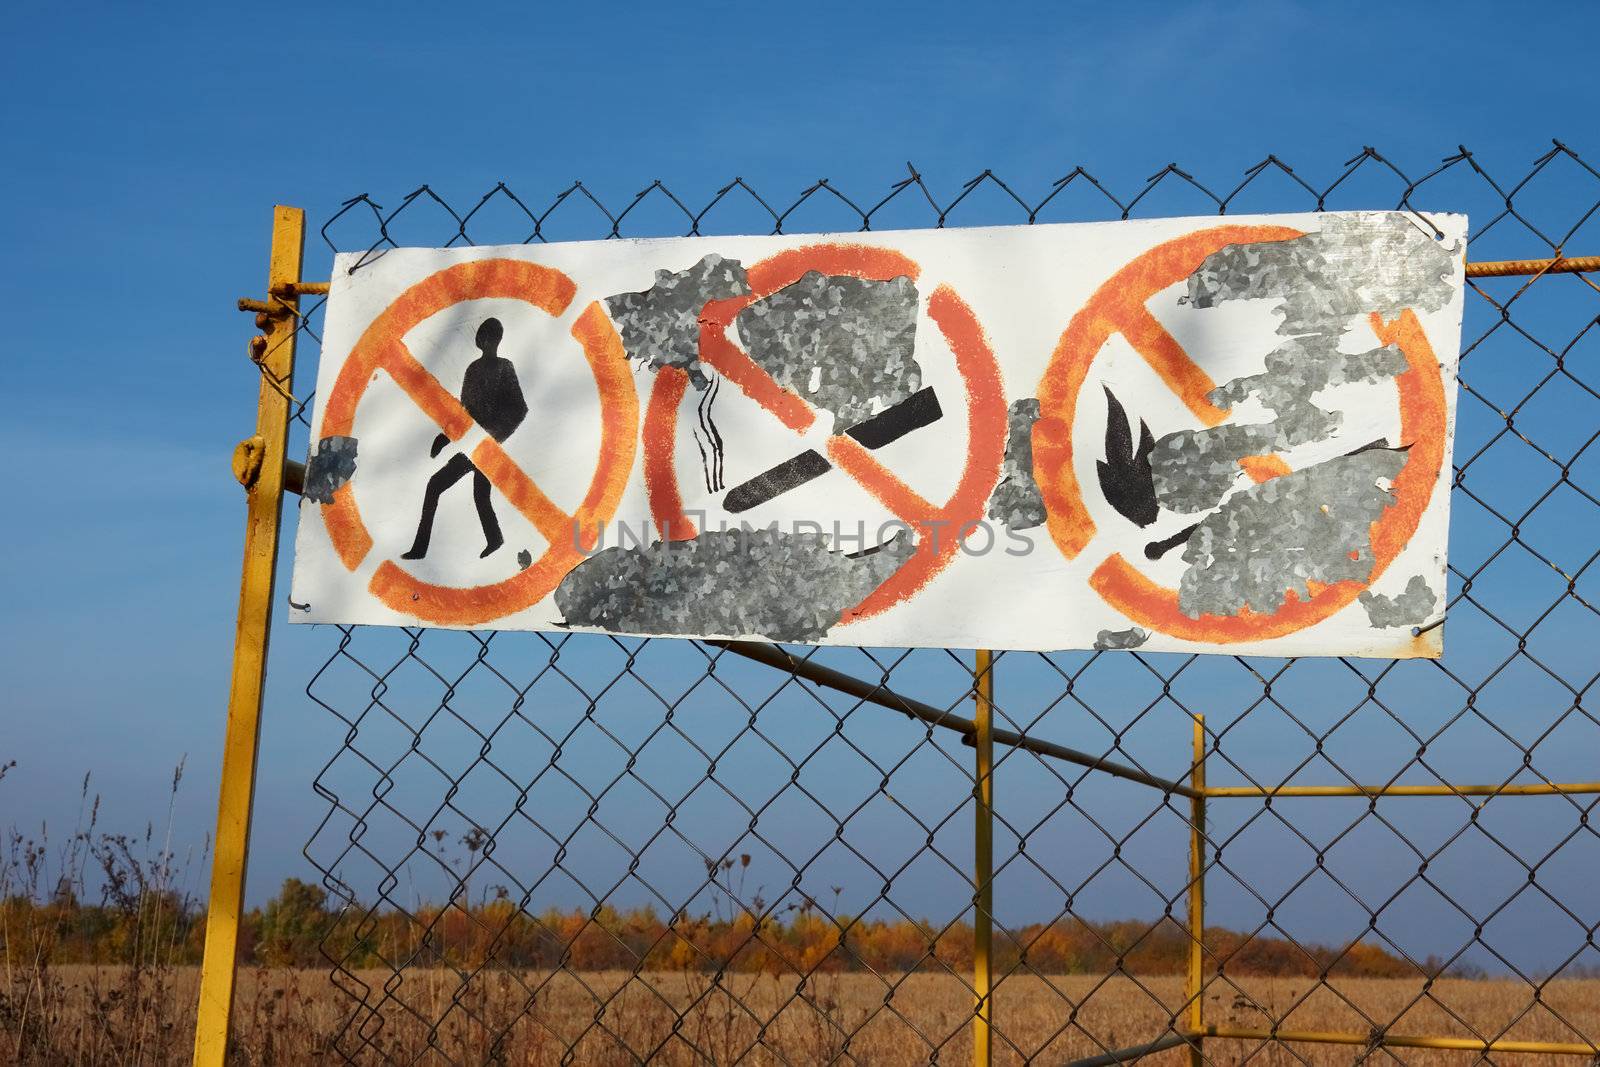 Old table with prohibitive signs and shelled paint hanging on mesh fences in fields